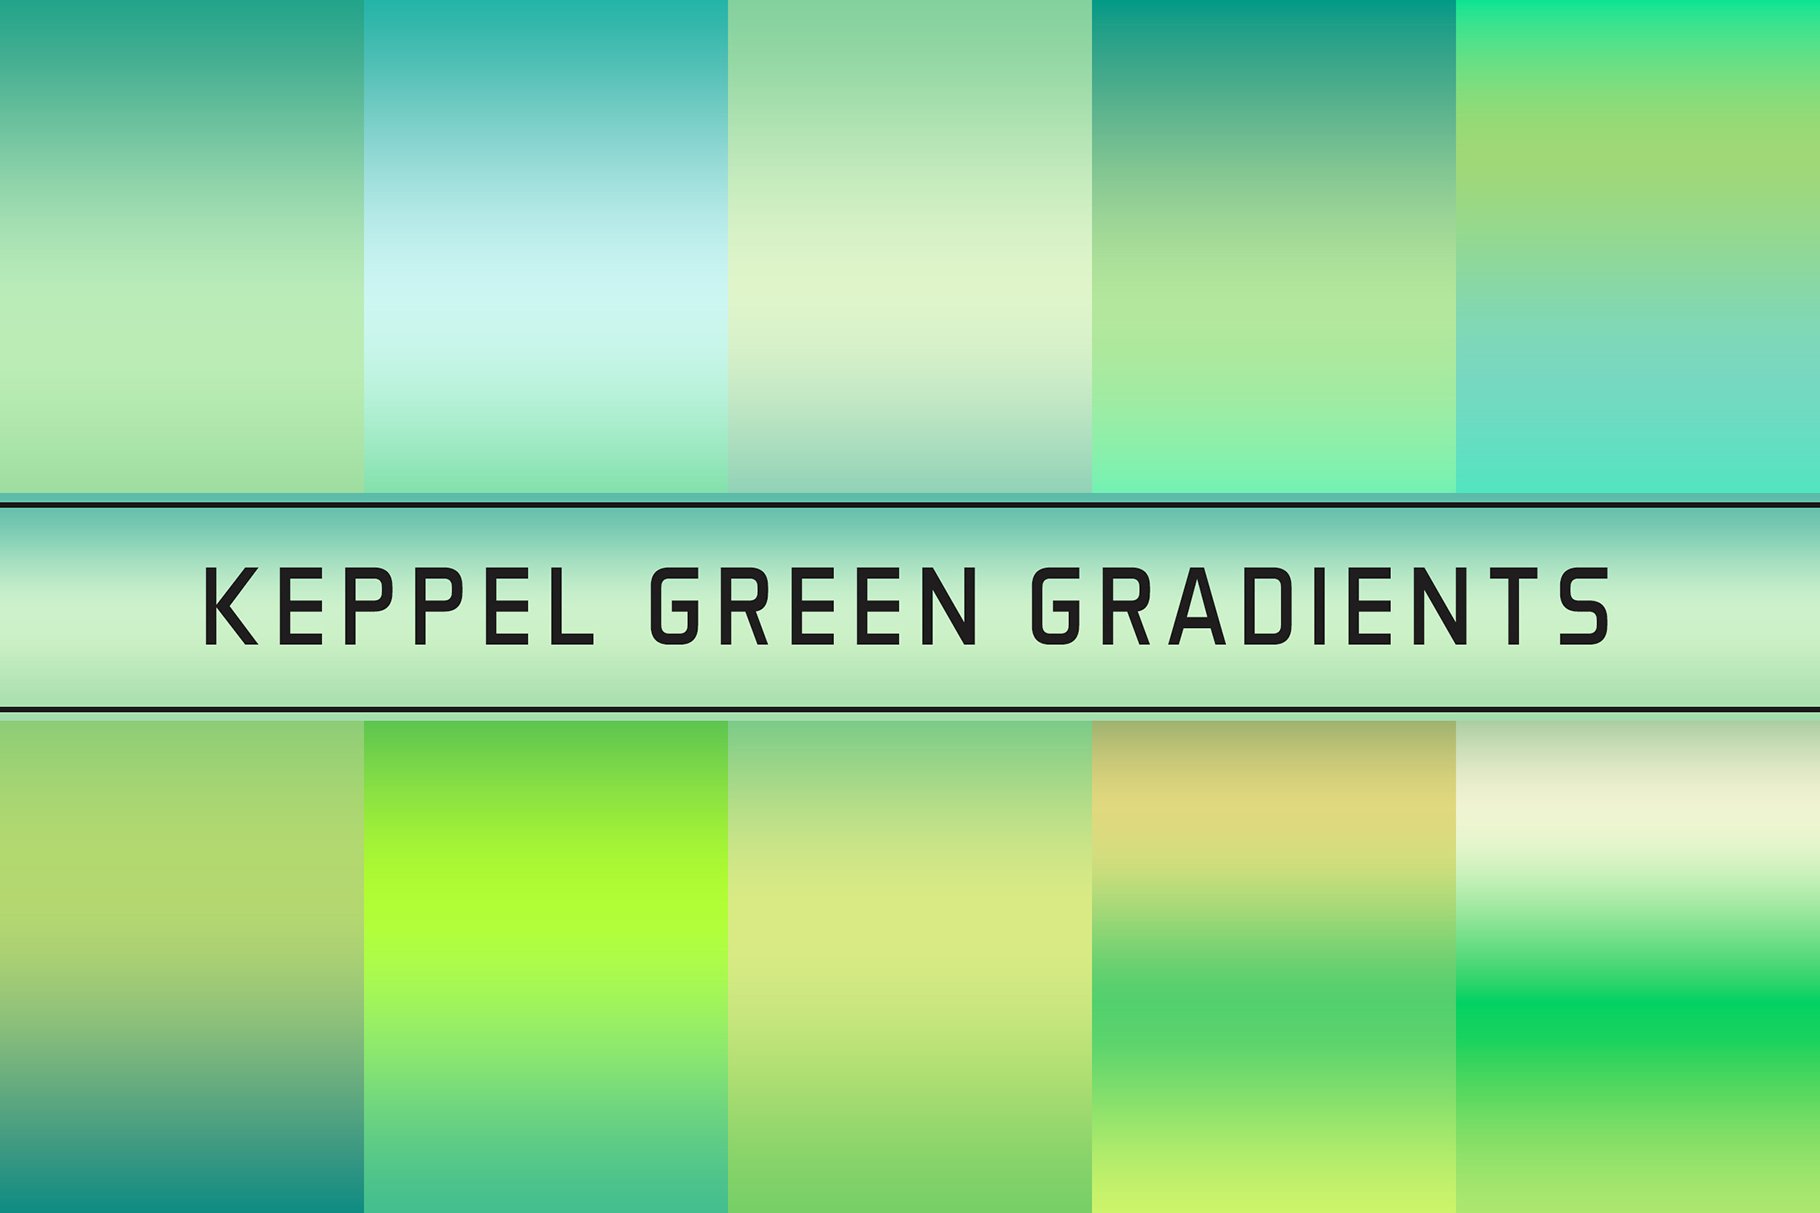 Keppel Green Gradientscover image.